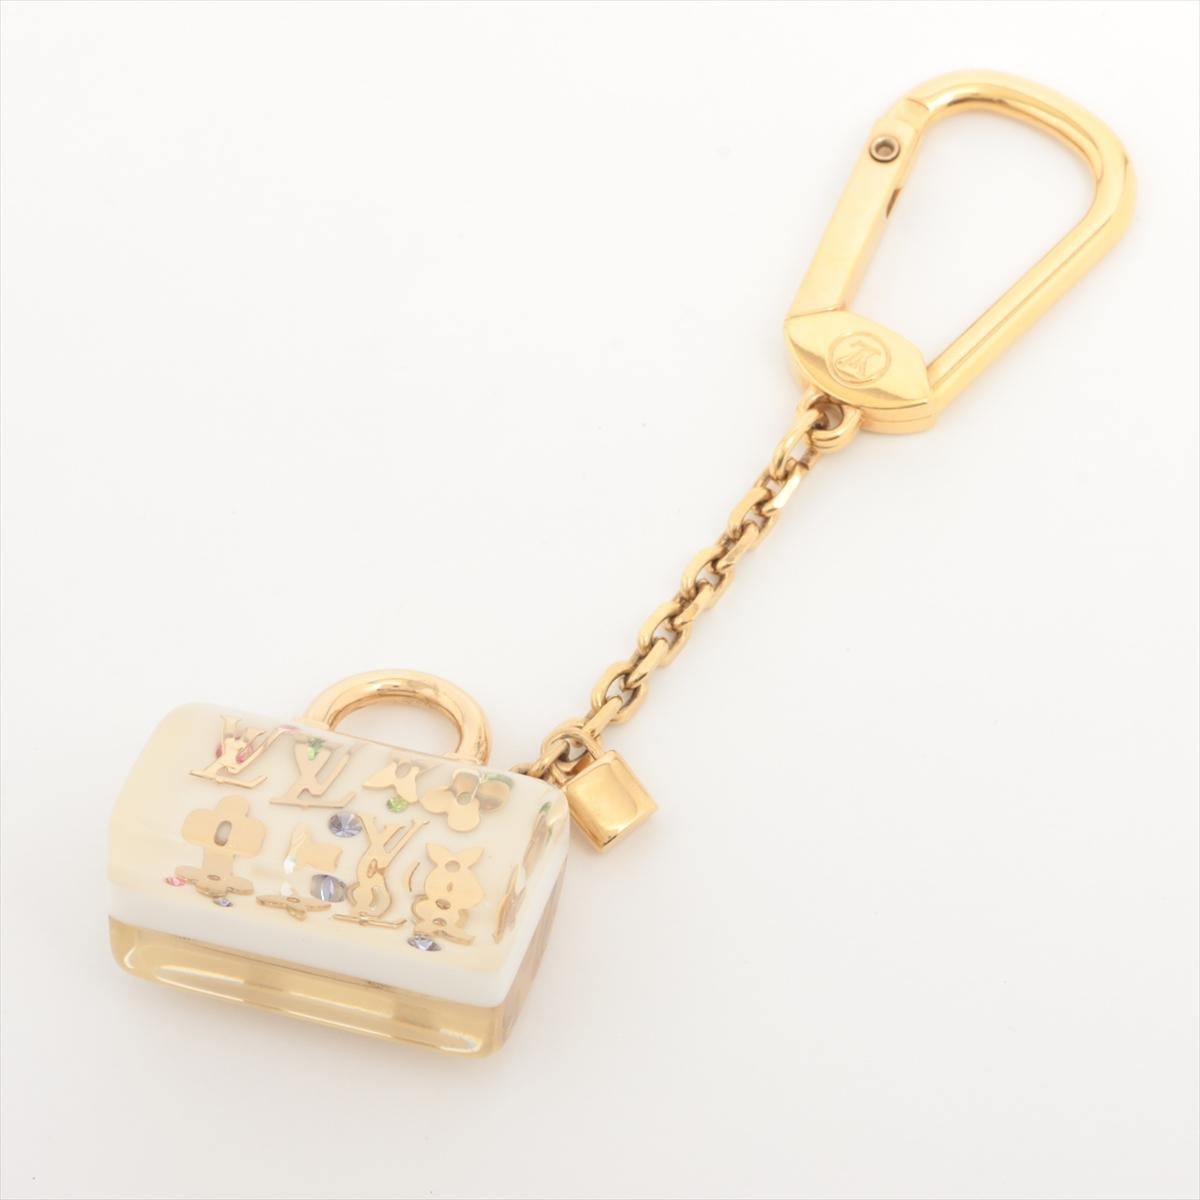 Louis Vuitton Speedy Bag Inclusion Keychain White In Good Condition For Sale In Indianapolis, IN